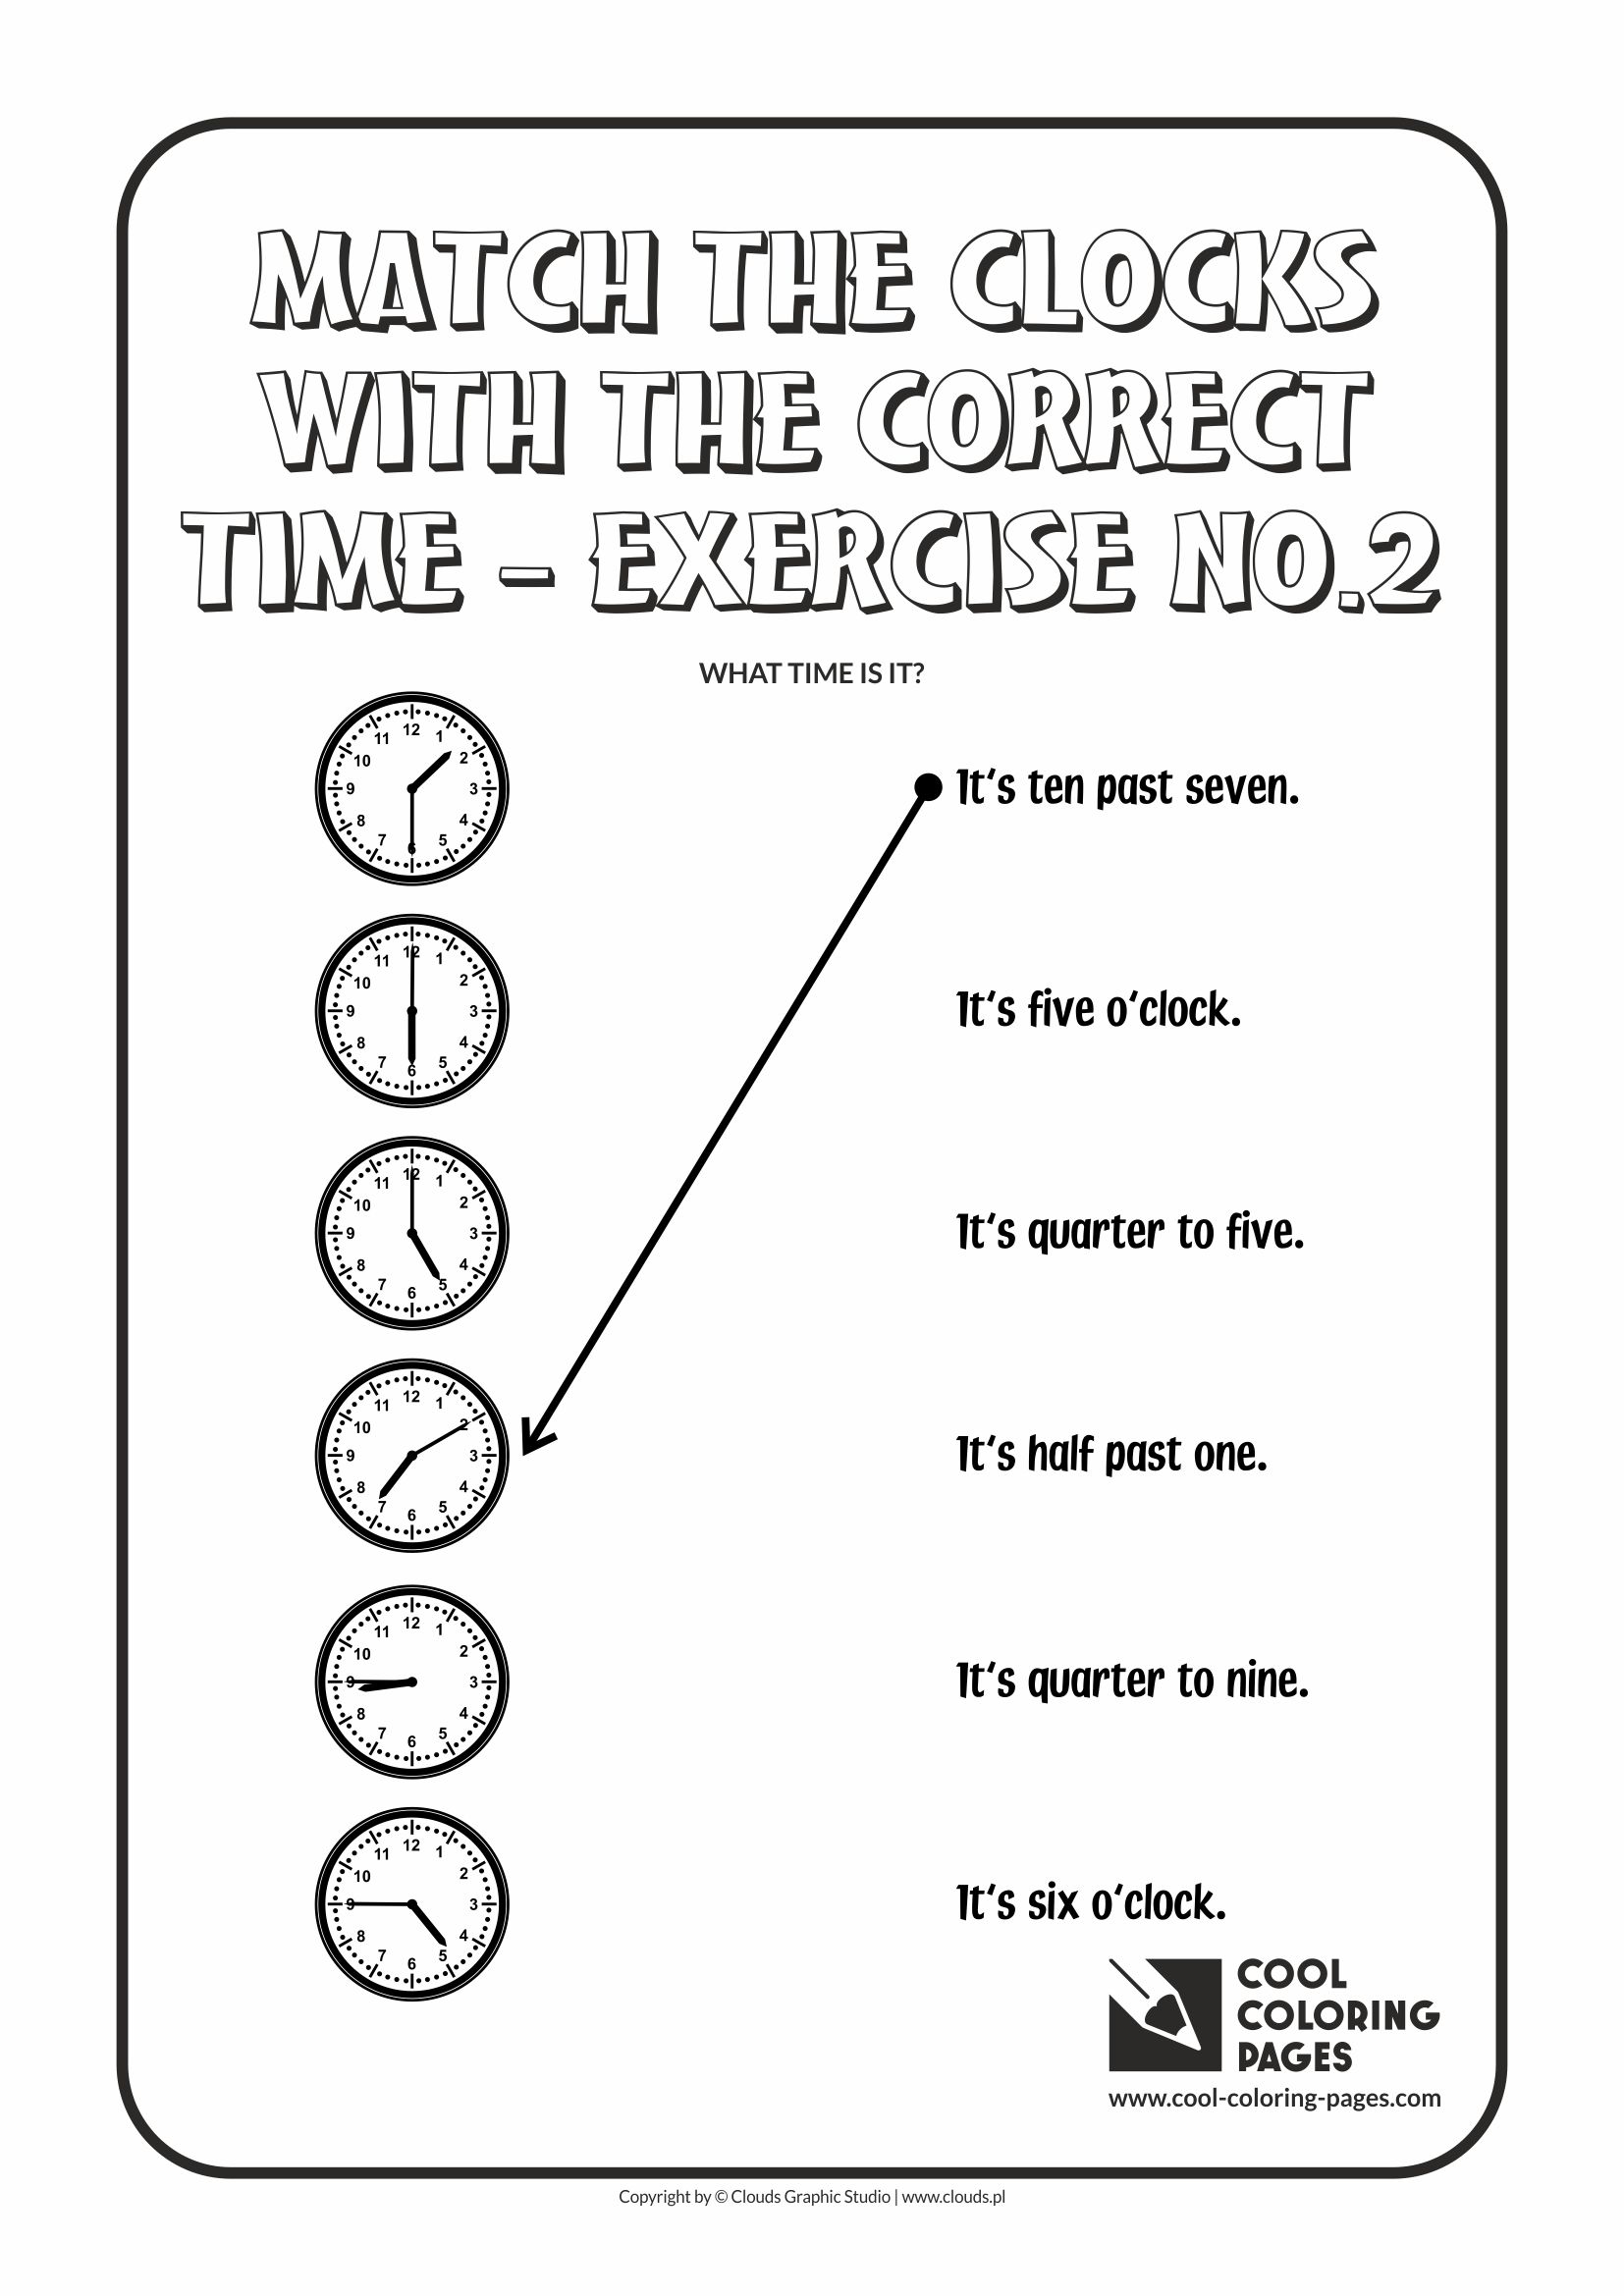 Cool Coloring Pages - Time / Match the clocks with the correct time no.2